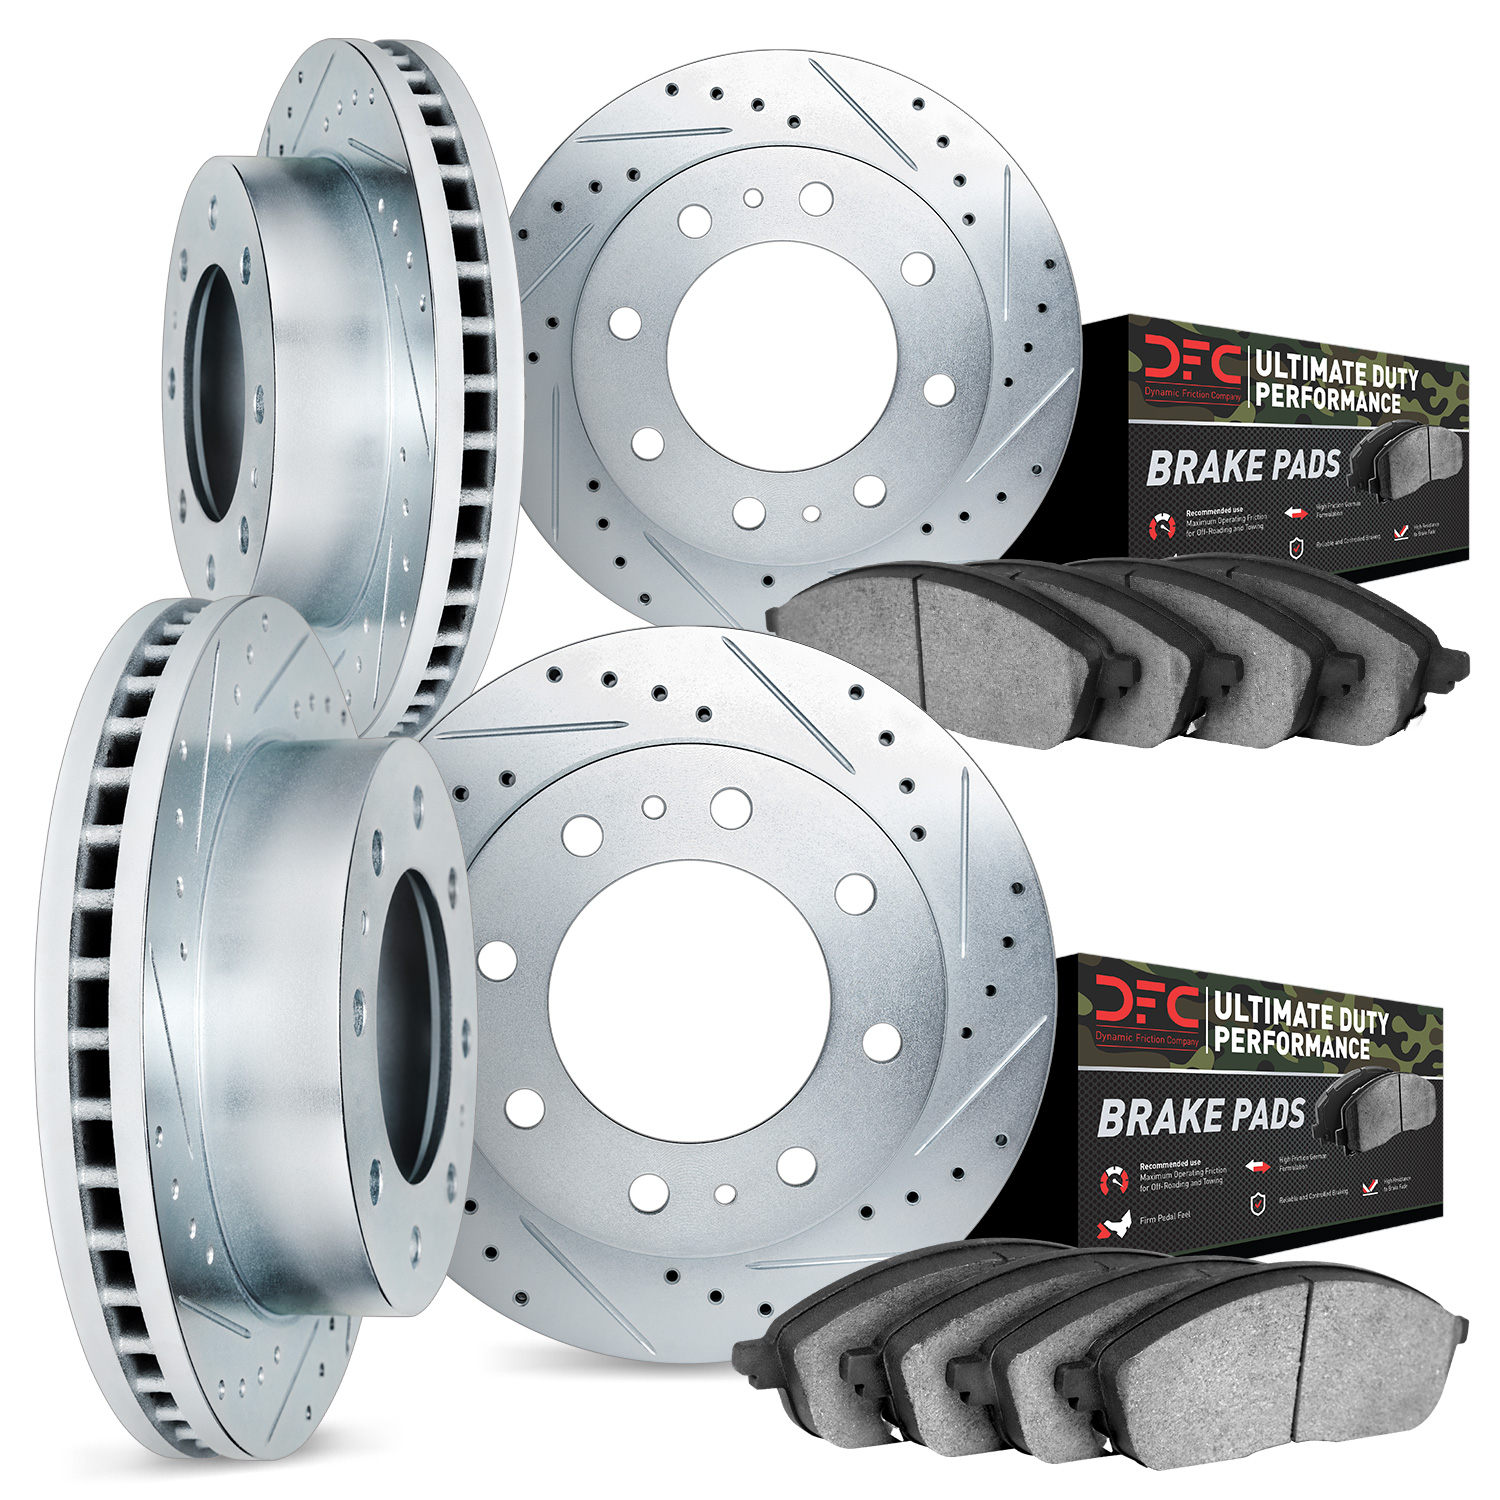 7404-67006 Drilled/Slotted Brake Rotors with Ultimate-Duty Brake Pads Kit [Silver], 2012-2021 Infiniti/Nissan, Position: Front a